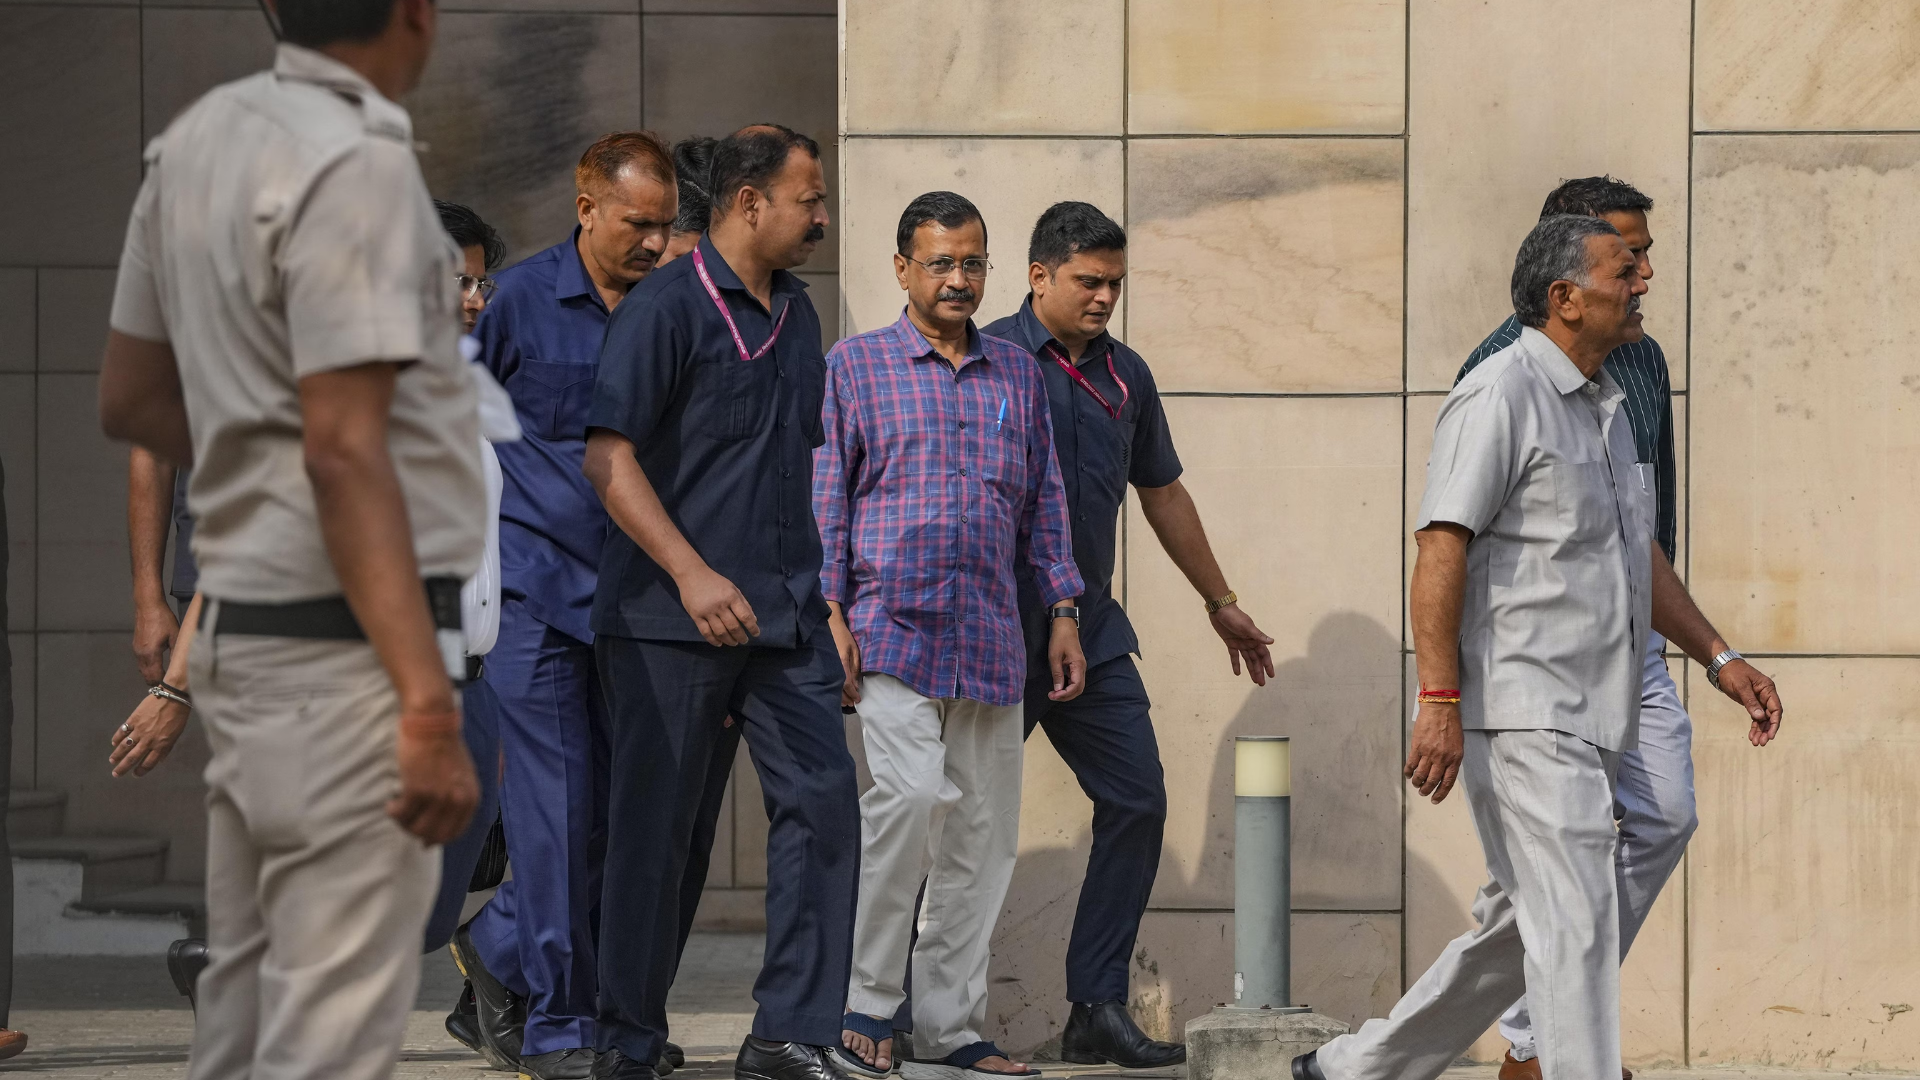 After 50 Days in Tihar Jail: Arvind Kejriwal’s Message To The People